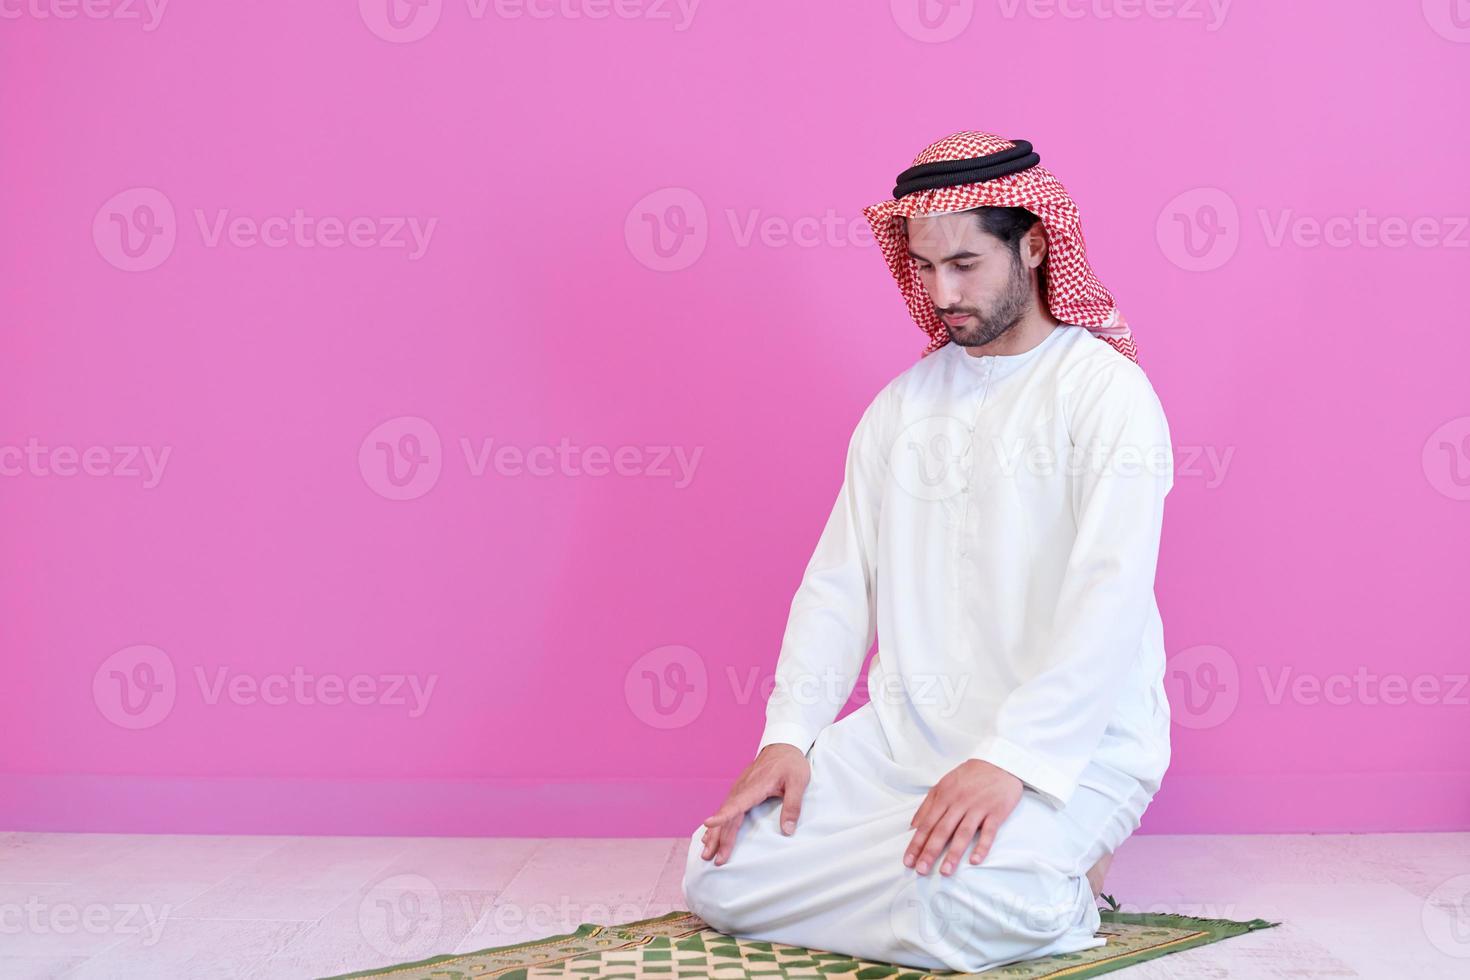 young arabian muslim man praying on the floor at home photo